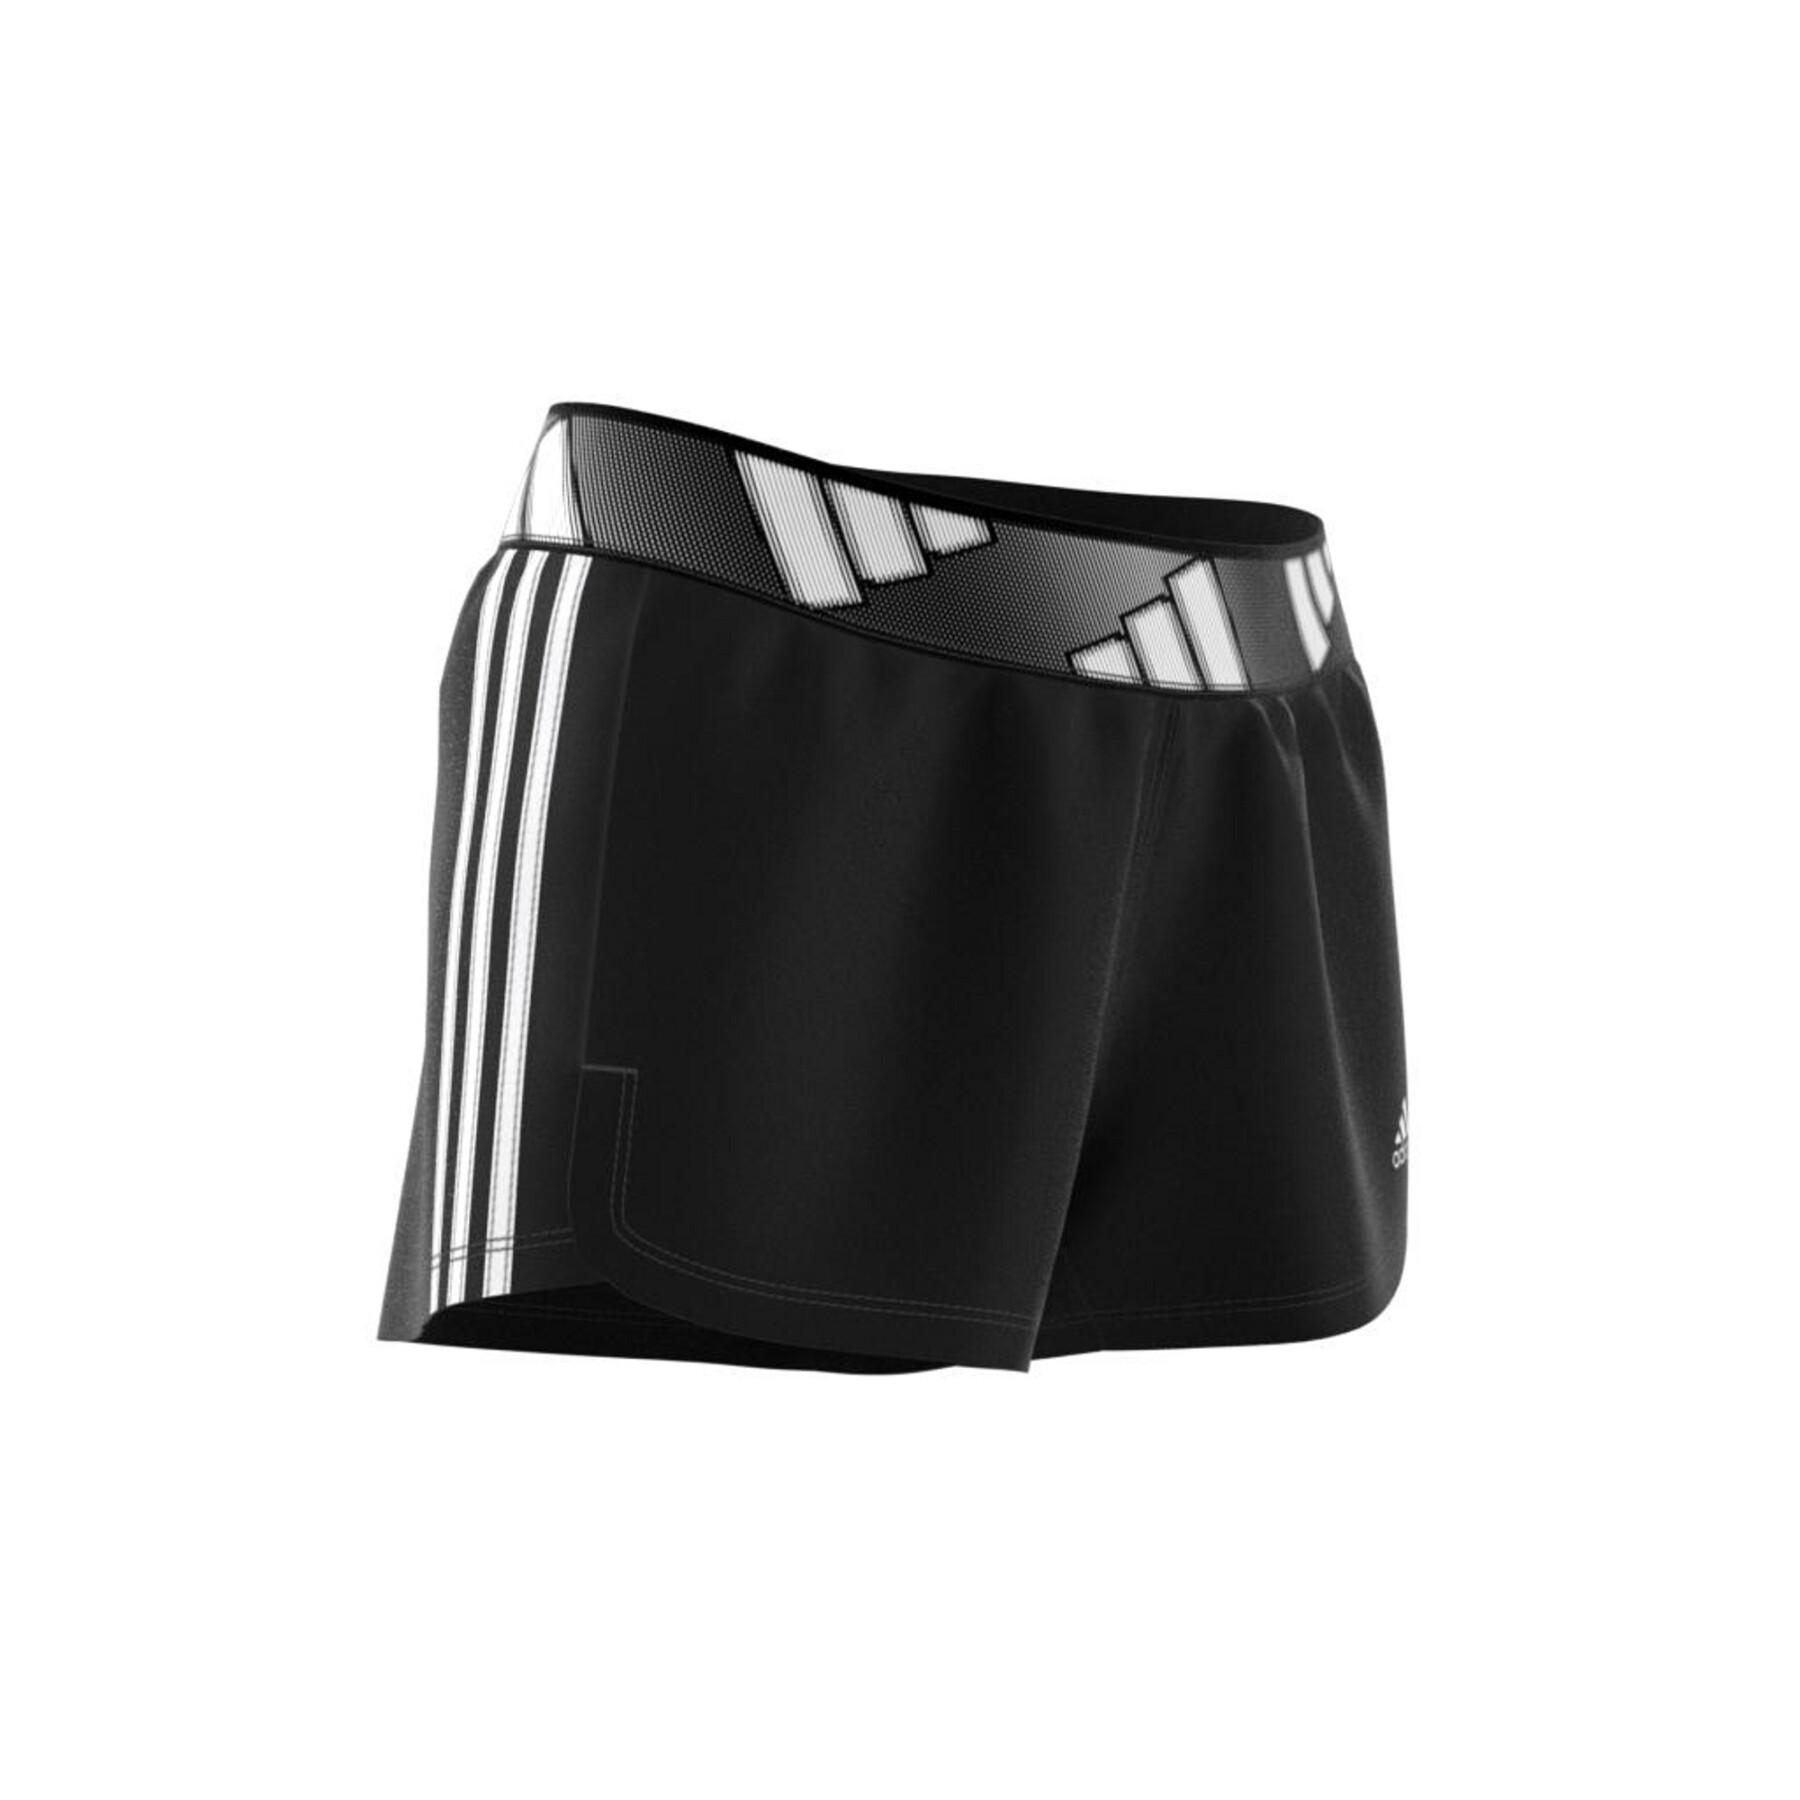 Women's shorts adidas Pacer 3-Stripes Adilife